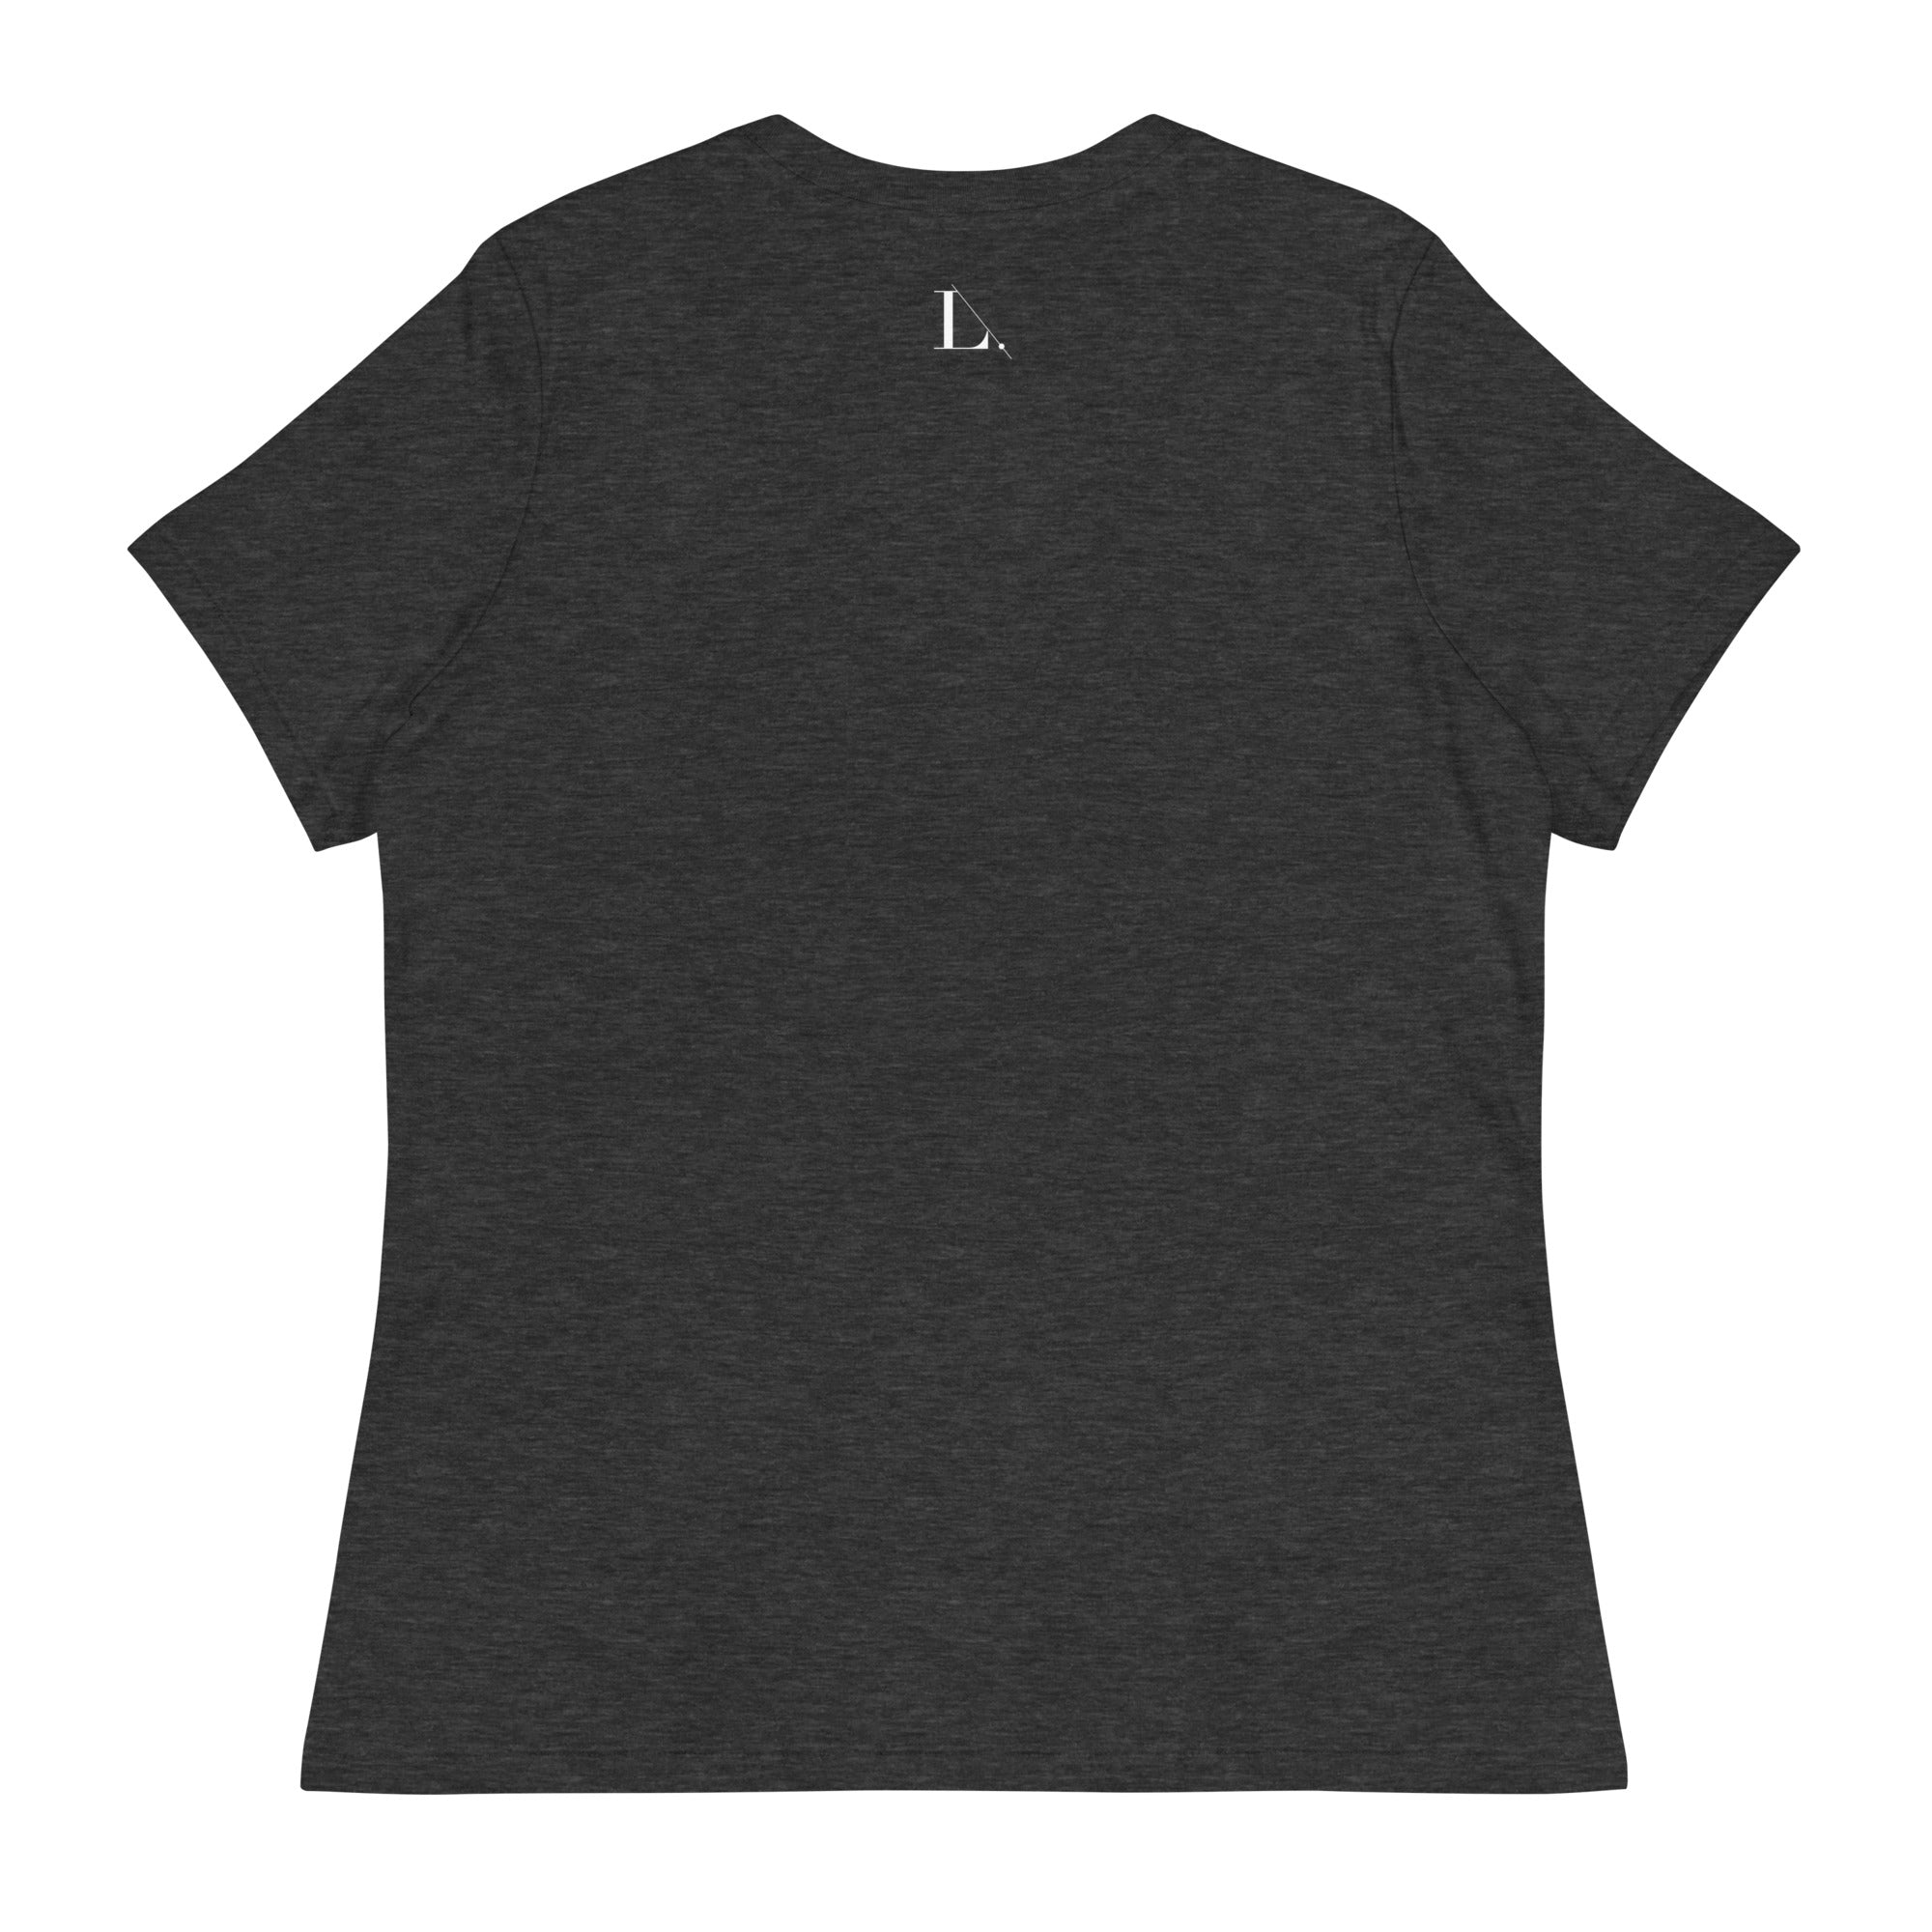 The Journey is the Joy - Women's Relaxed T-Shirt in Navy, Black, Dark Heather Grey and Heather Mauve